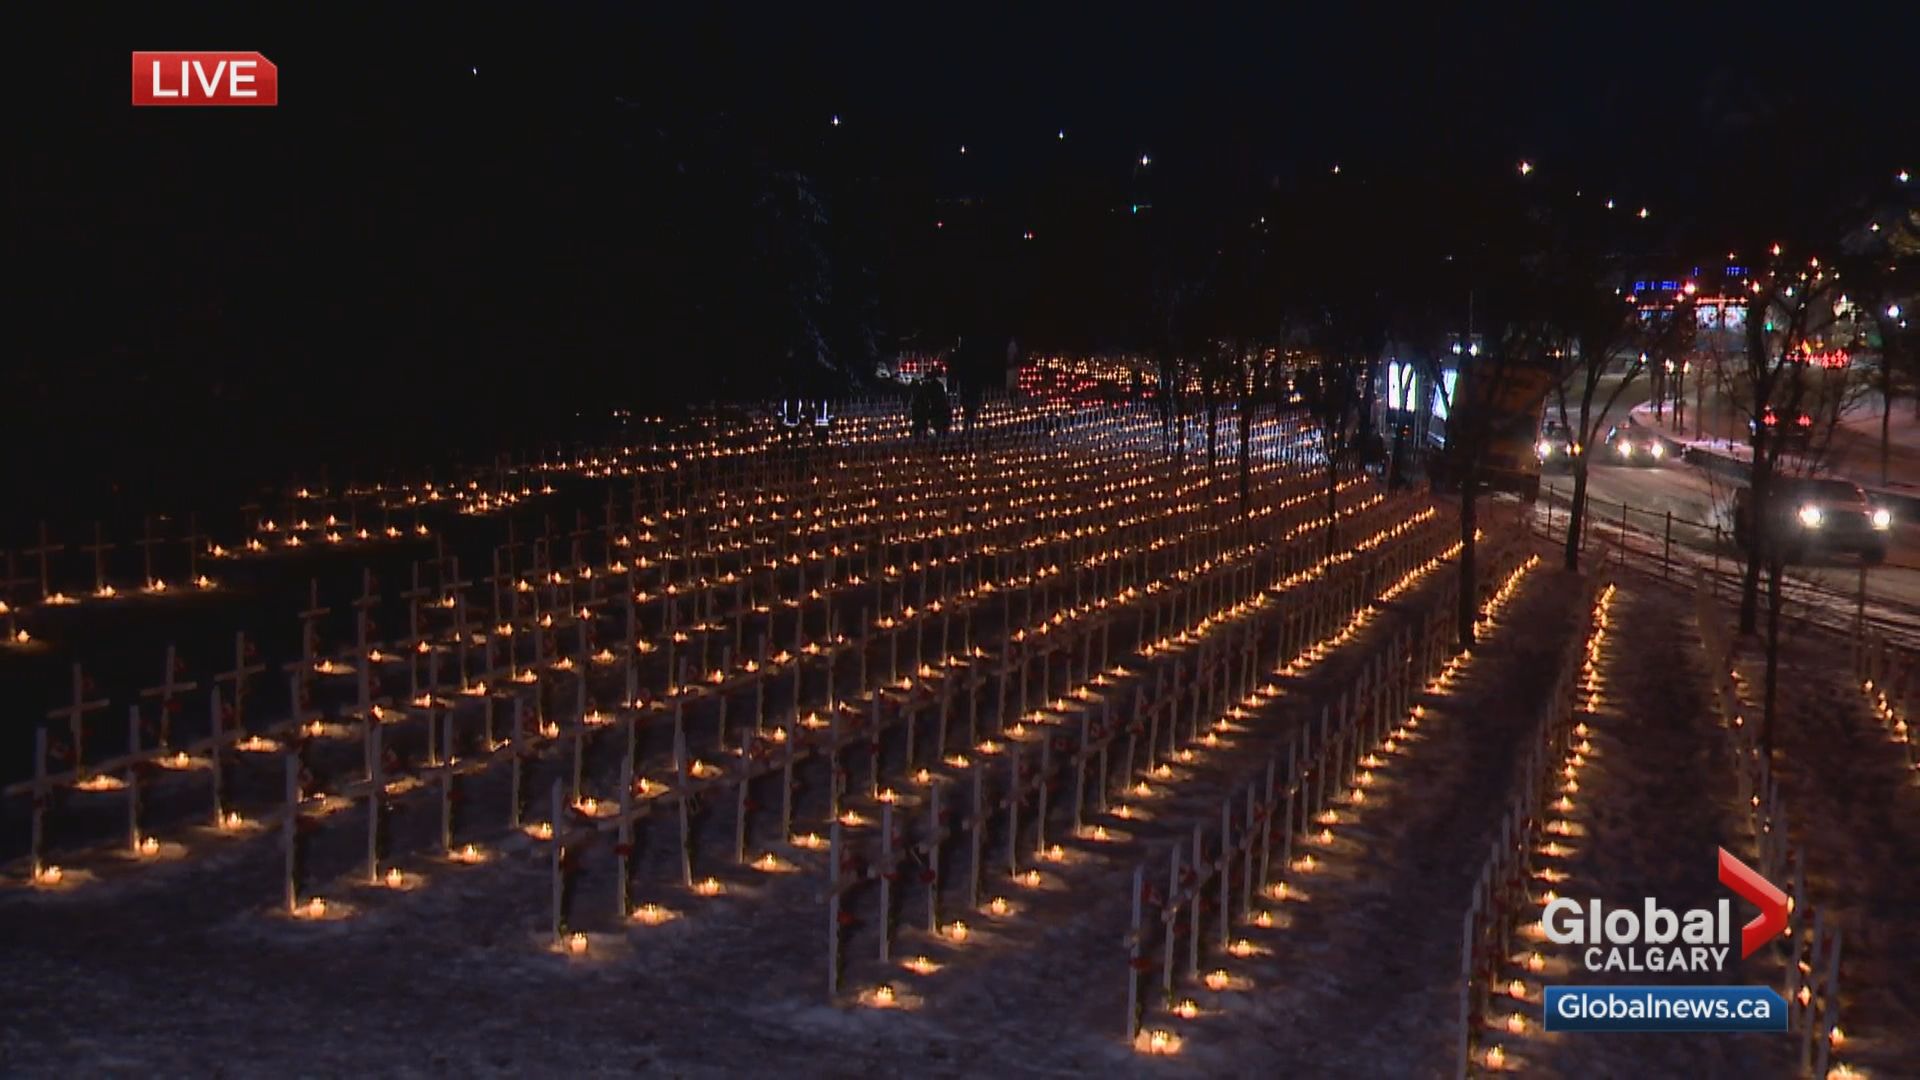 Calgary’s Field of Crosses illuminated by thousands of candles ahead of Remembrance Day